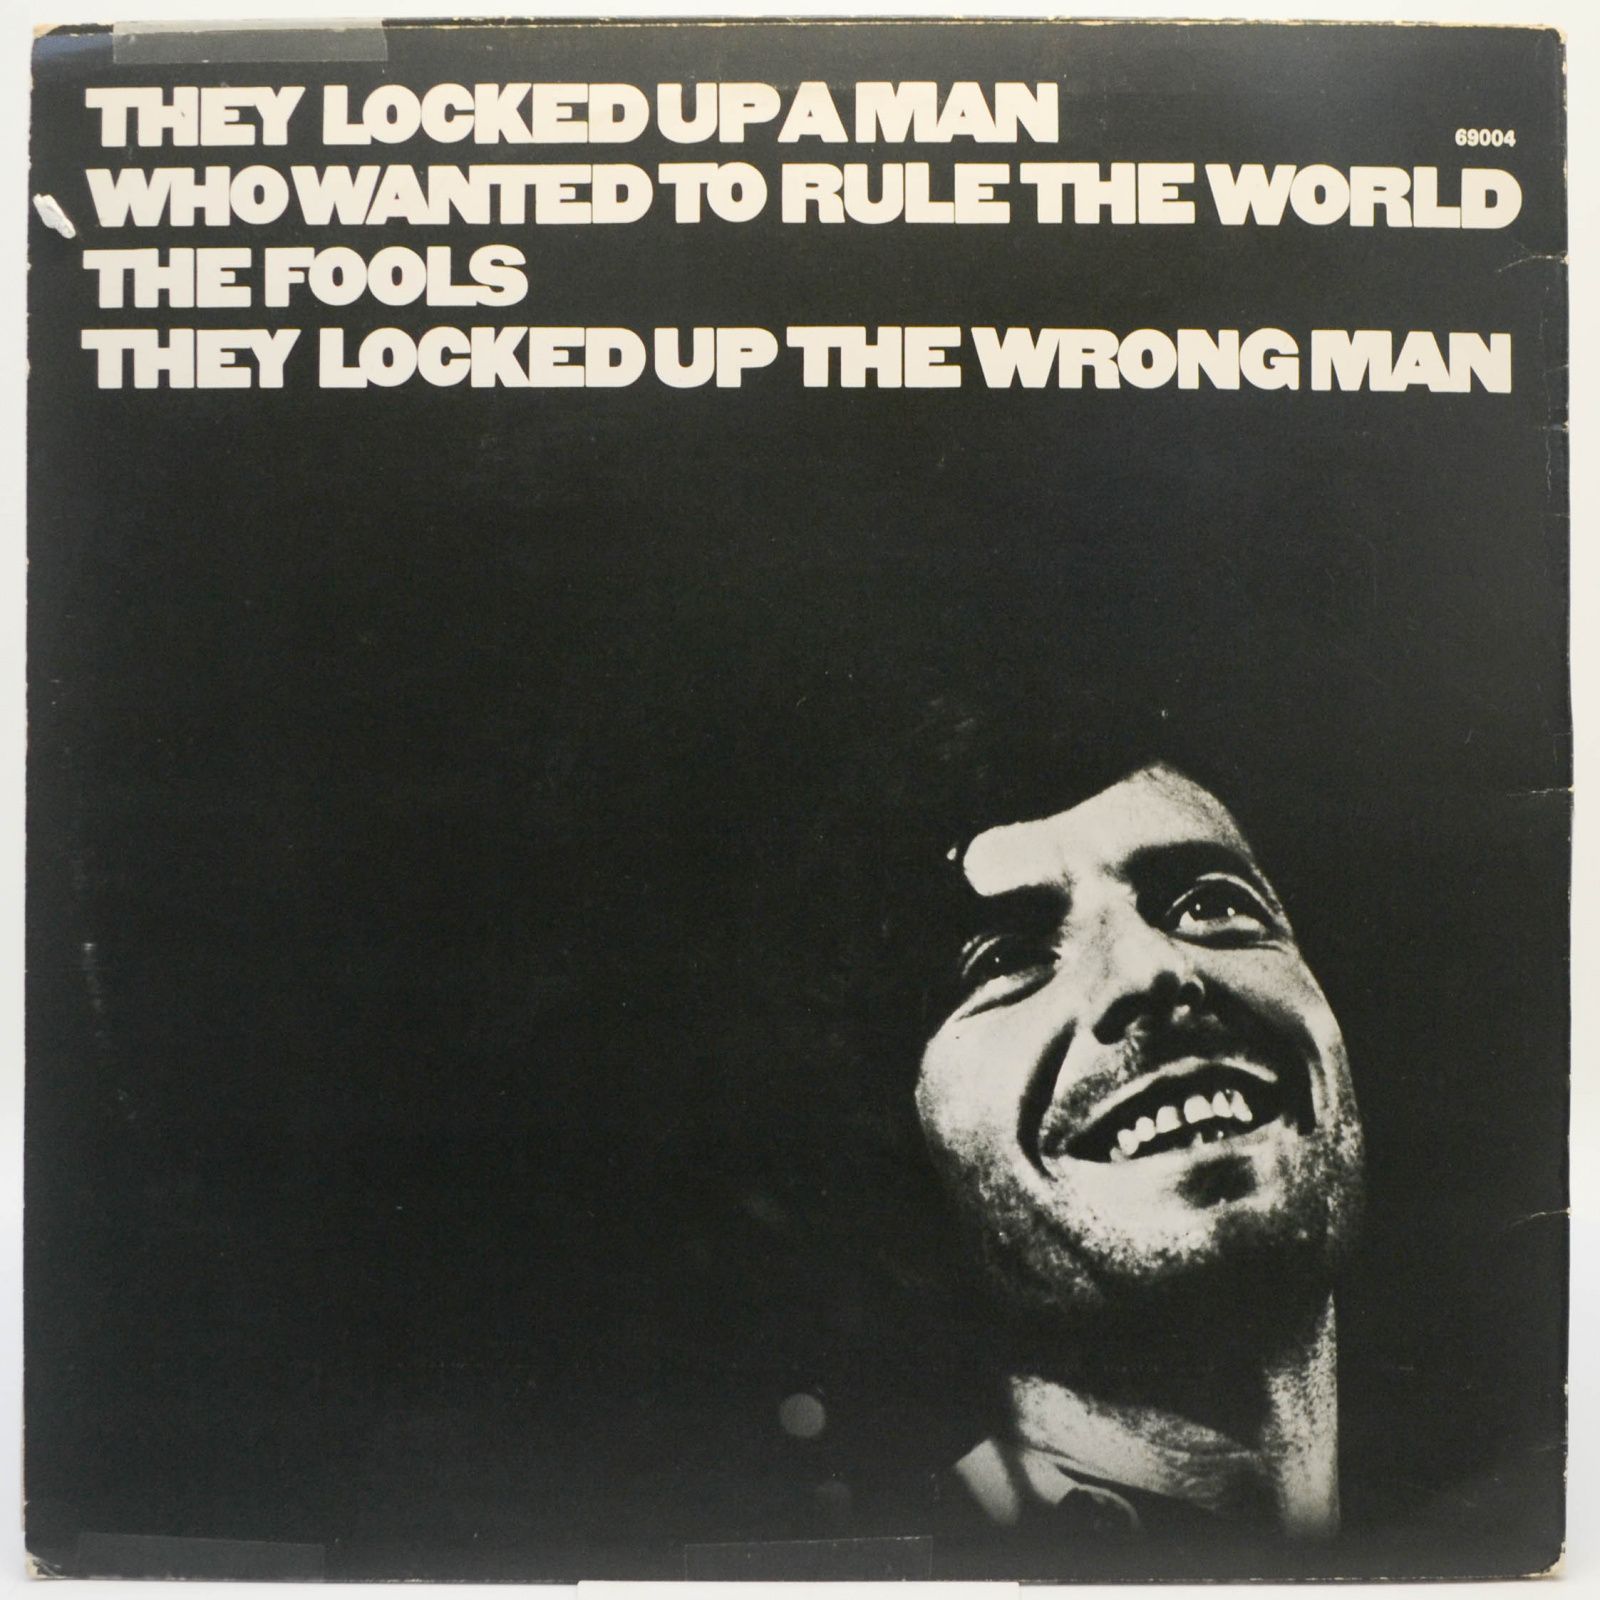 Leonard Cohen — Songs Of Love And Hate (UK), 1971